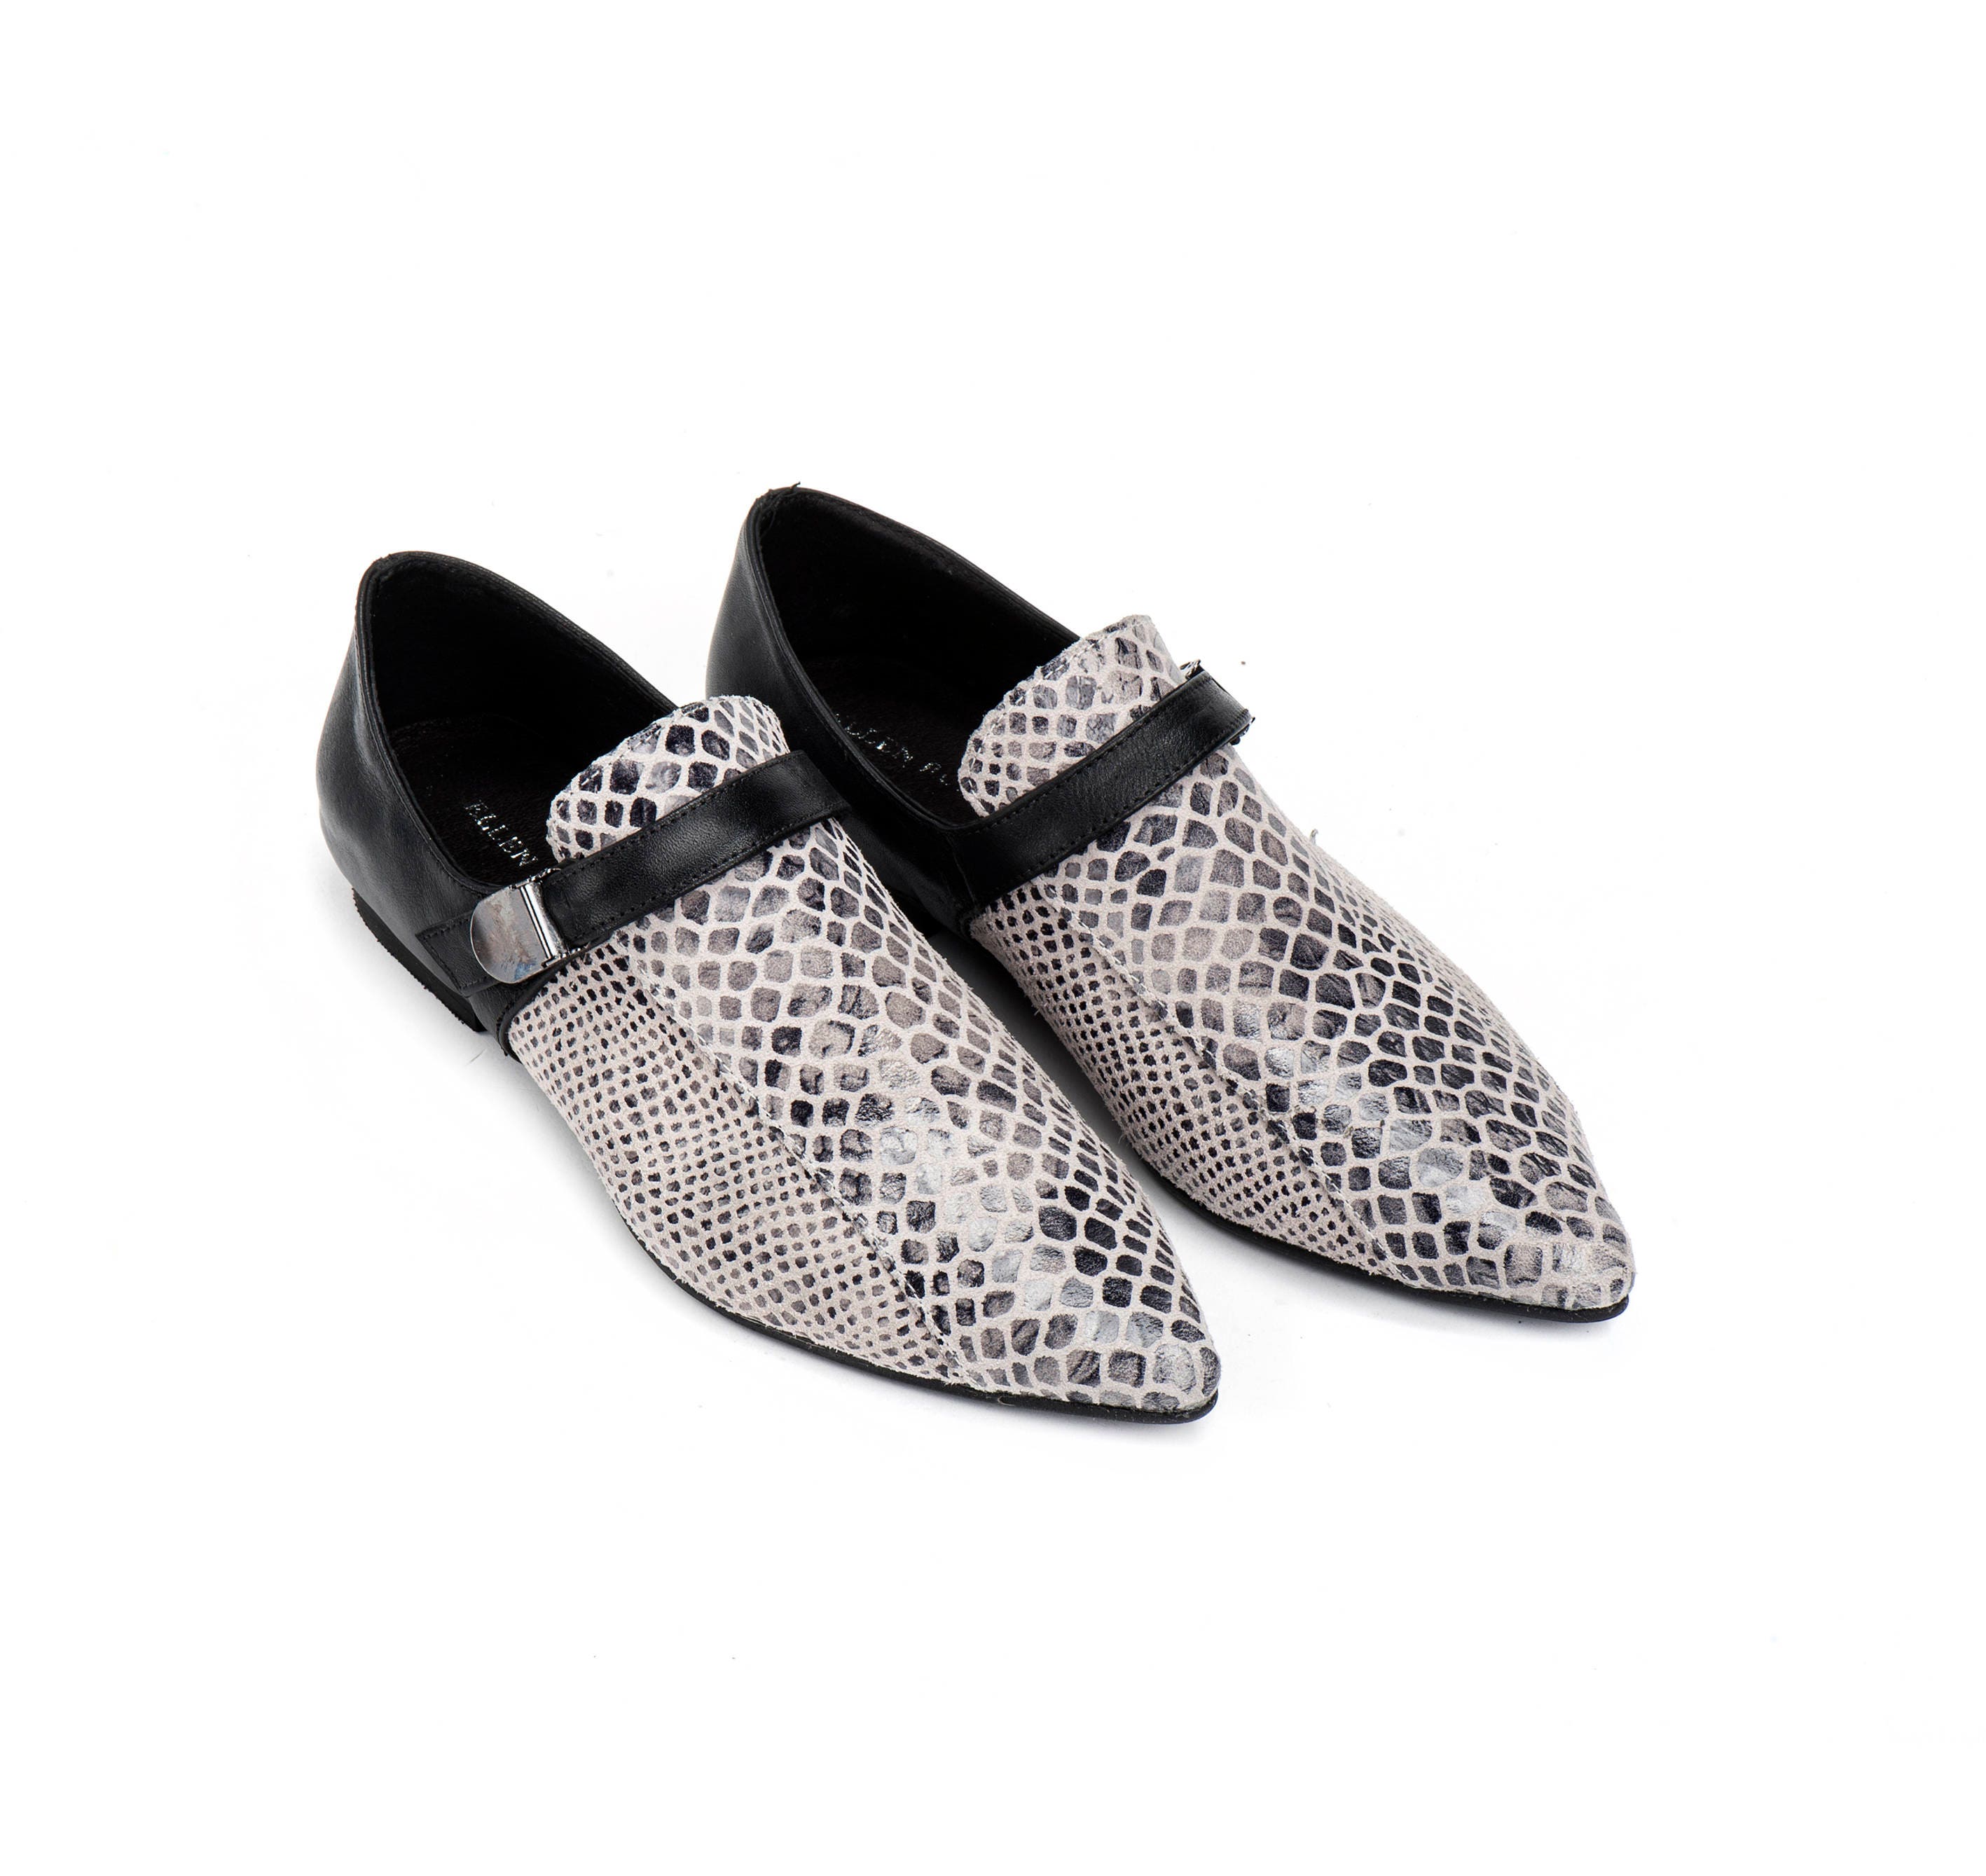 Womens Flat Shoes / Stone Grey Leather Loafers / Slip On Shoes